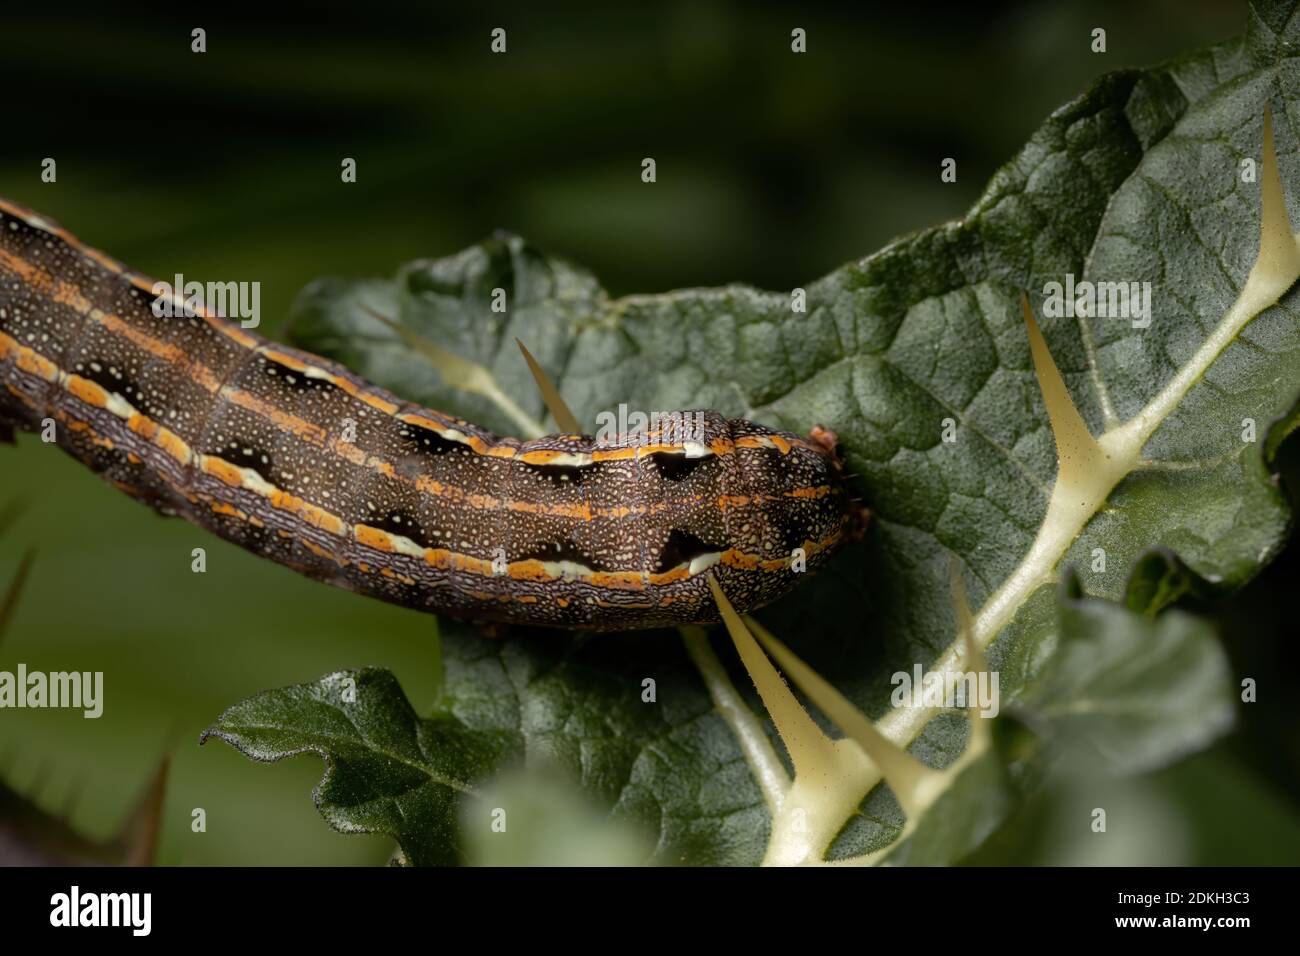 Caterpillar of the species Spodoptera cosmioides eating a leaf from a plant of the genus solanum Stock Photo